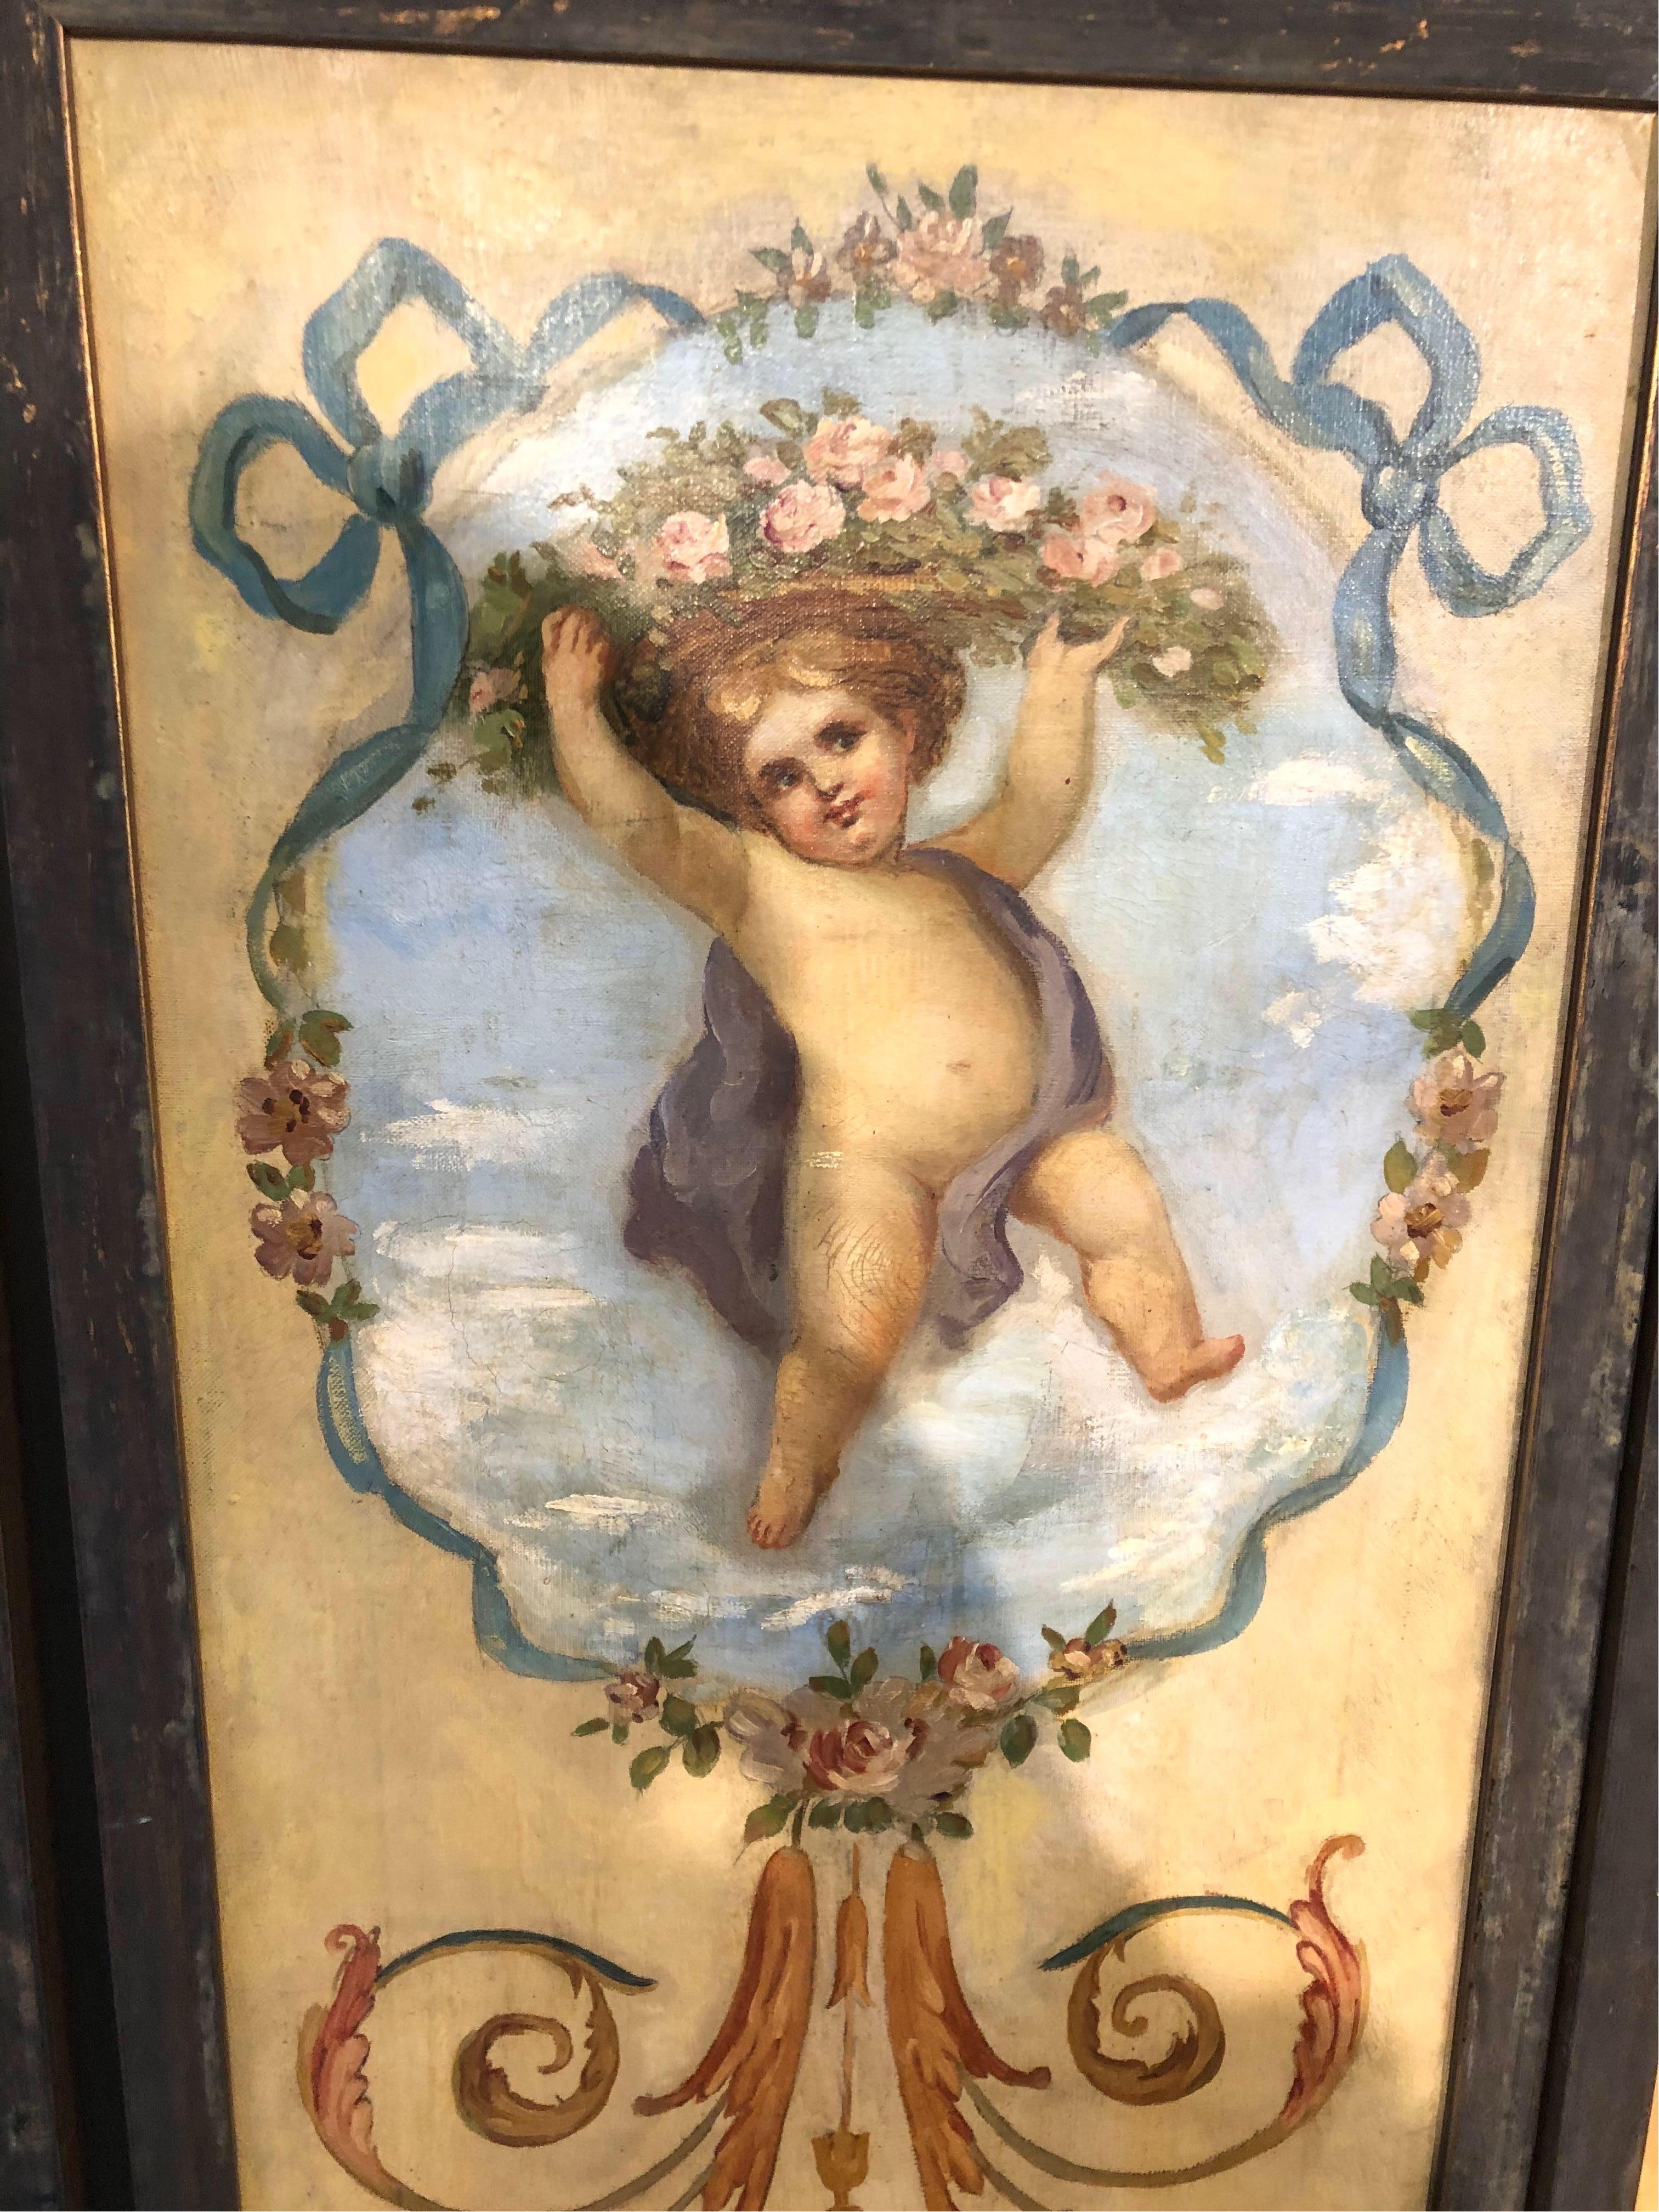 Set of 5 early 20th century continental hand painted neoclassical style panels now mounted to be hung. Likely Italian.